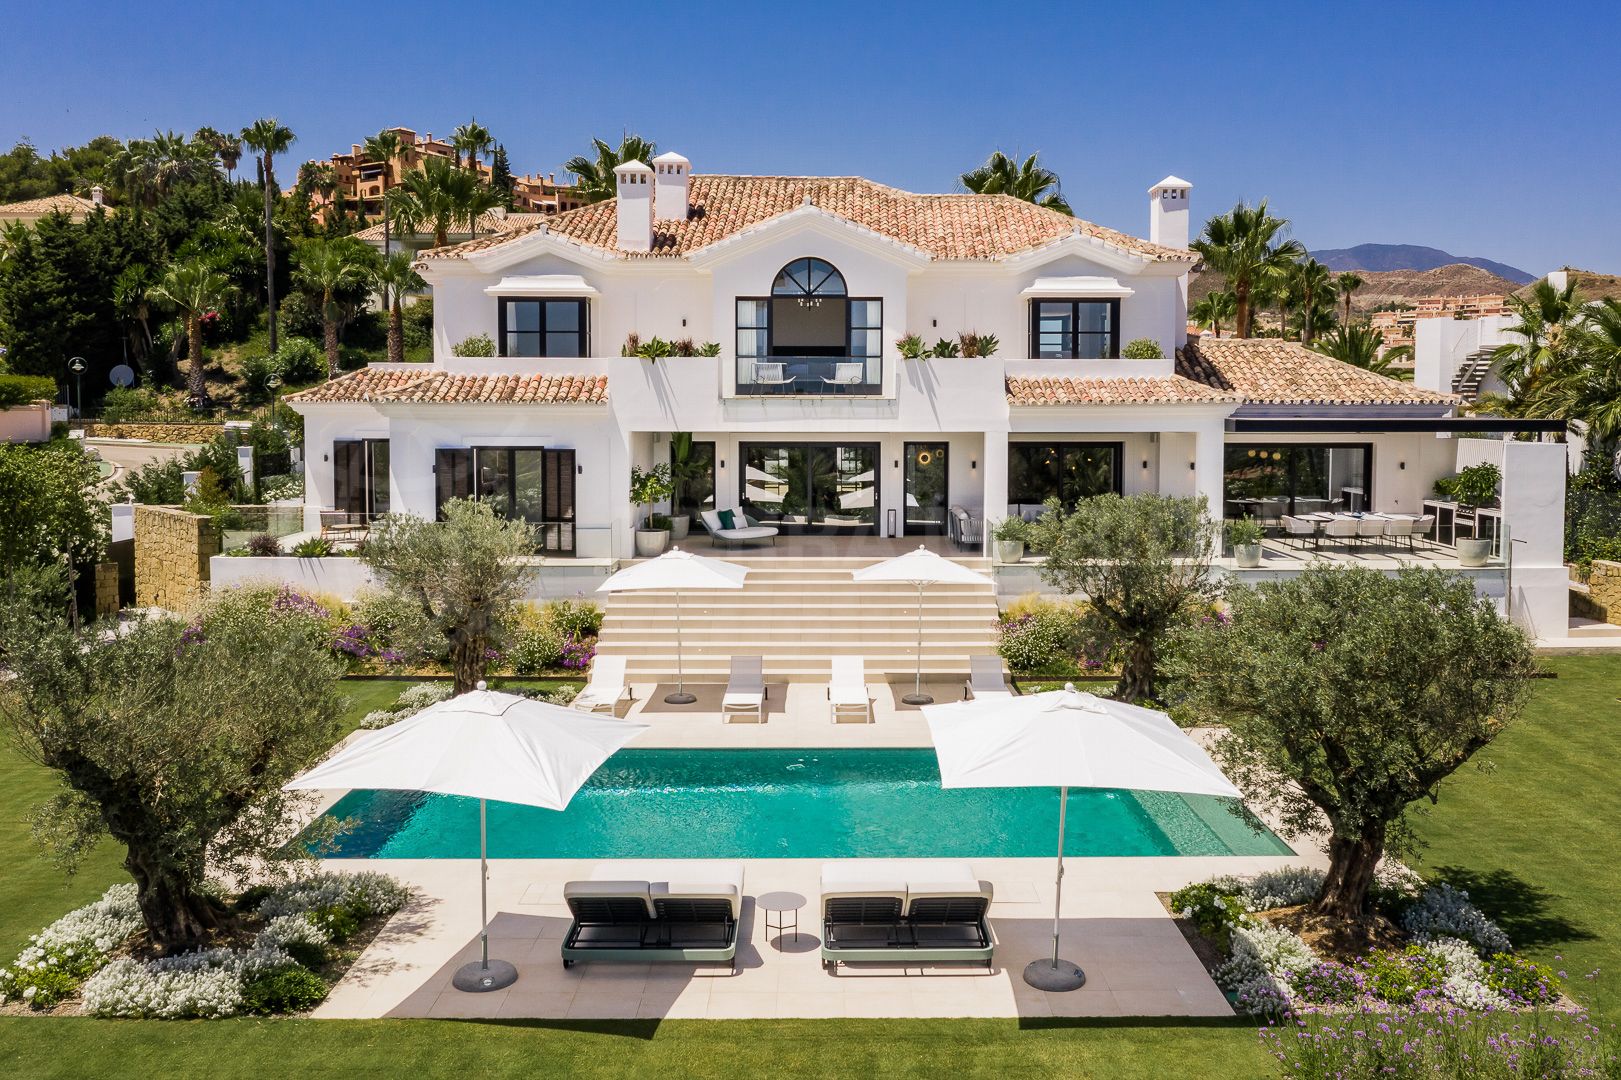 Why the Costa del Sol real-estate market is COVID-resistant